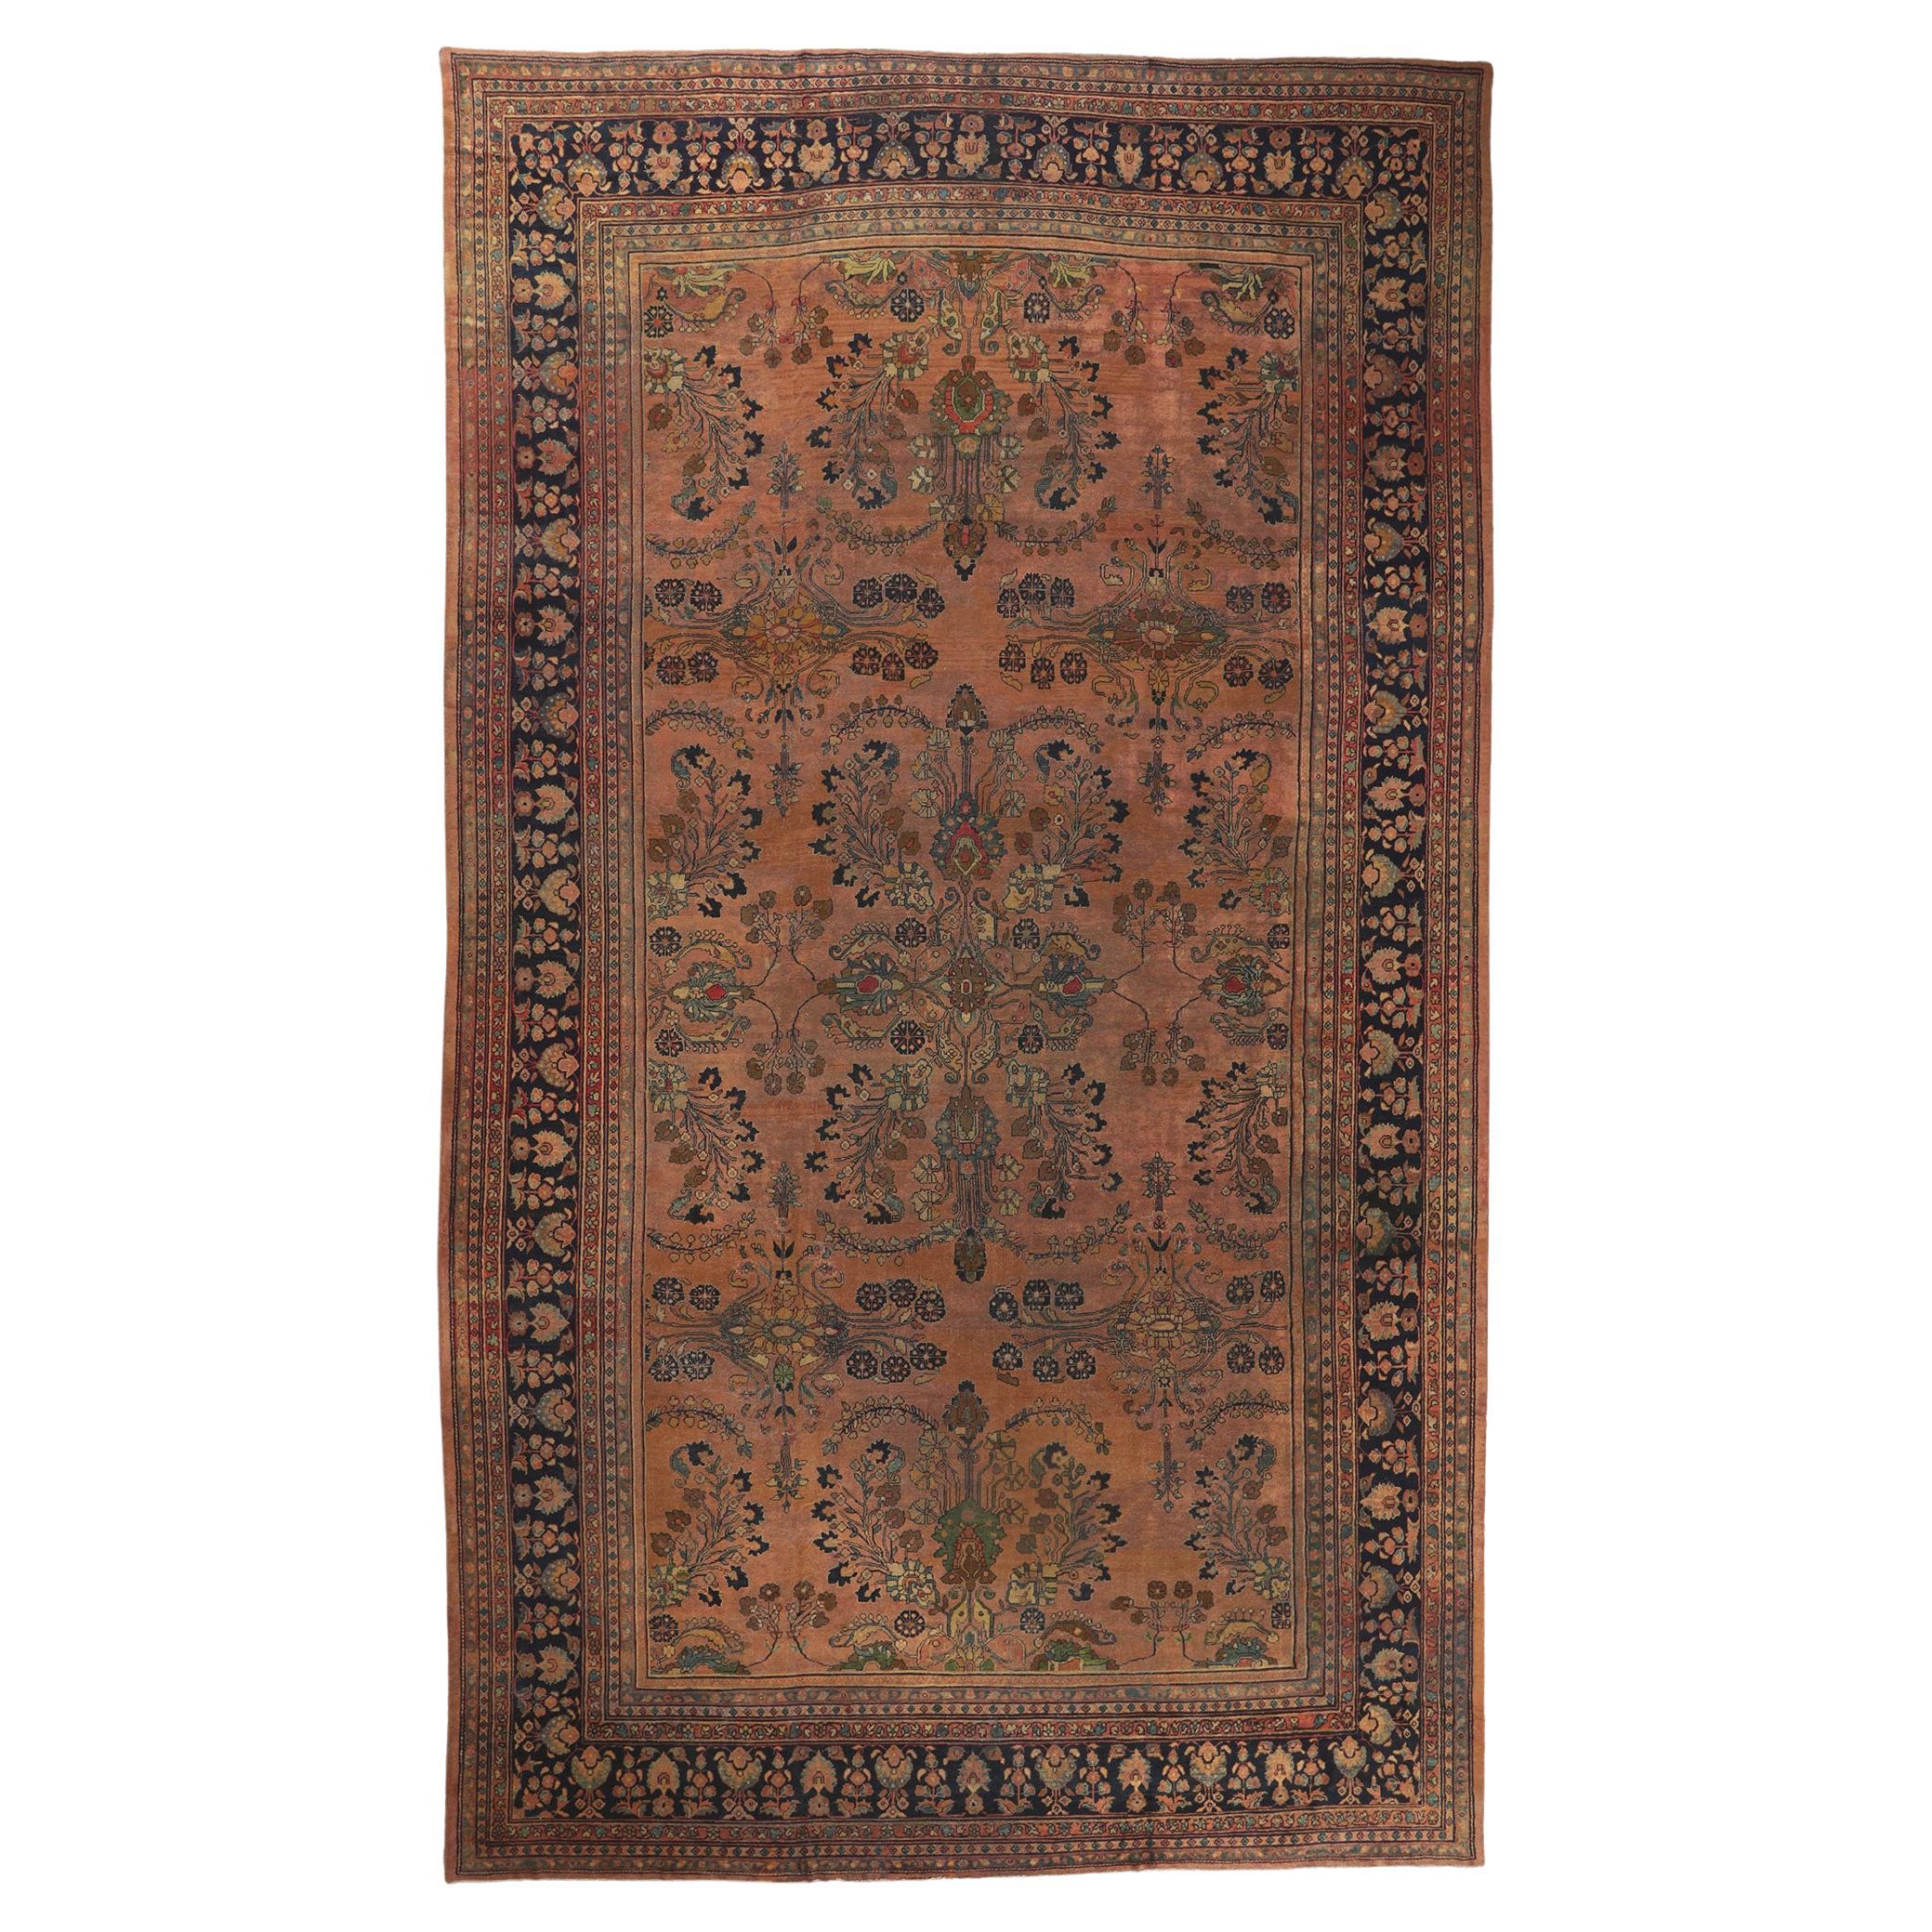 Tapis Persan Antique Mahal Hotel Taille Lobby